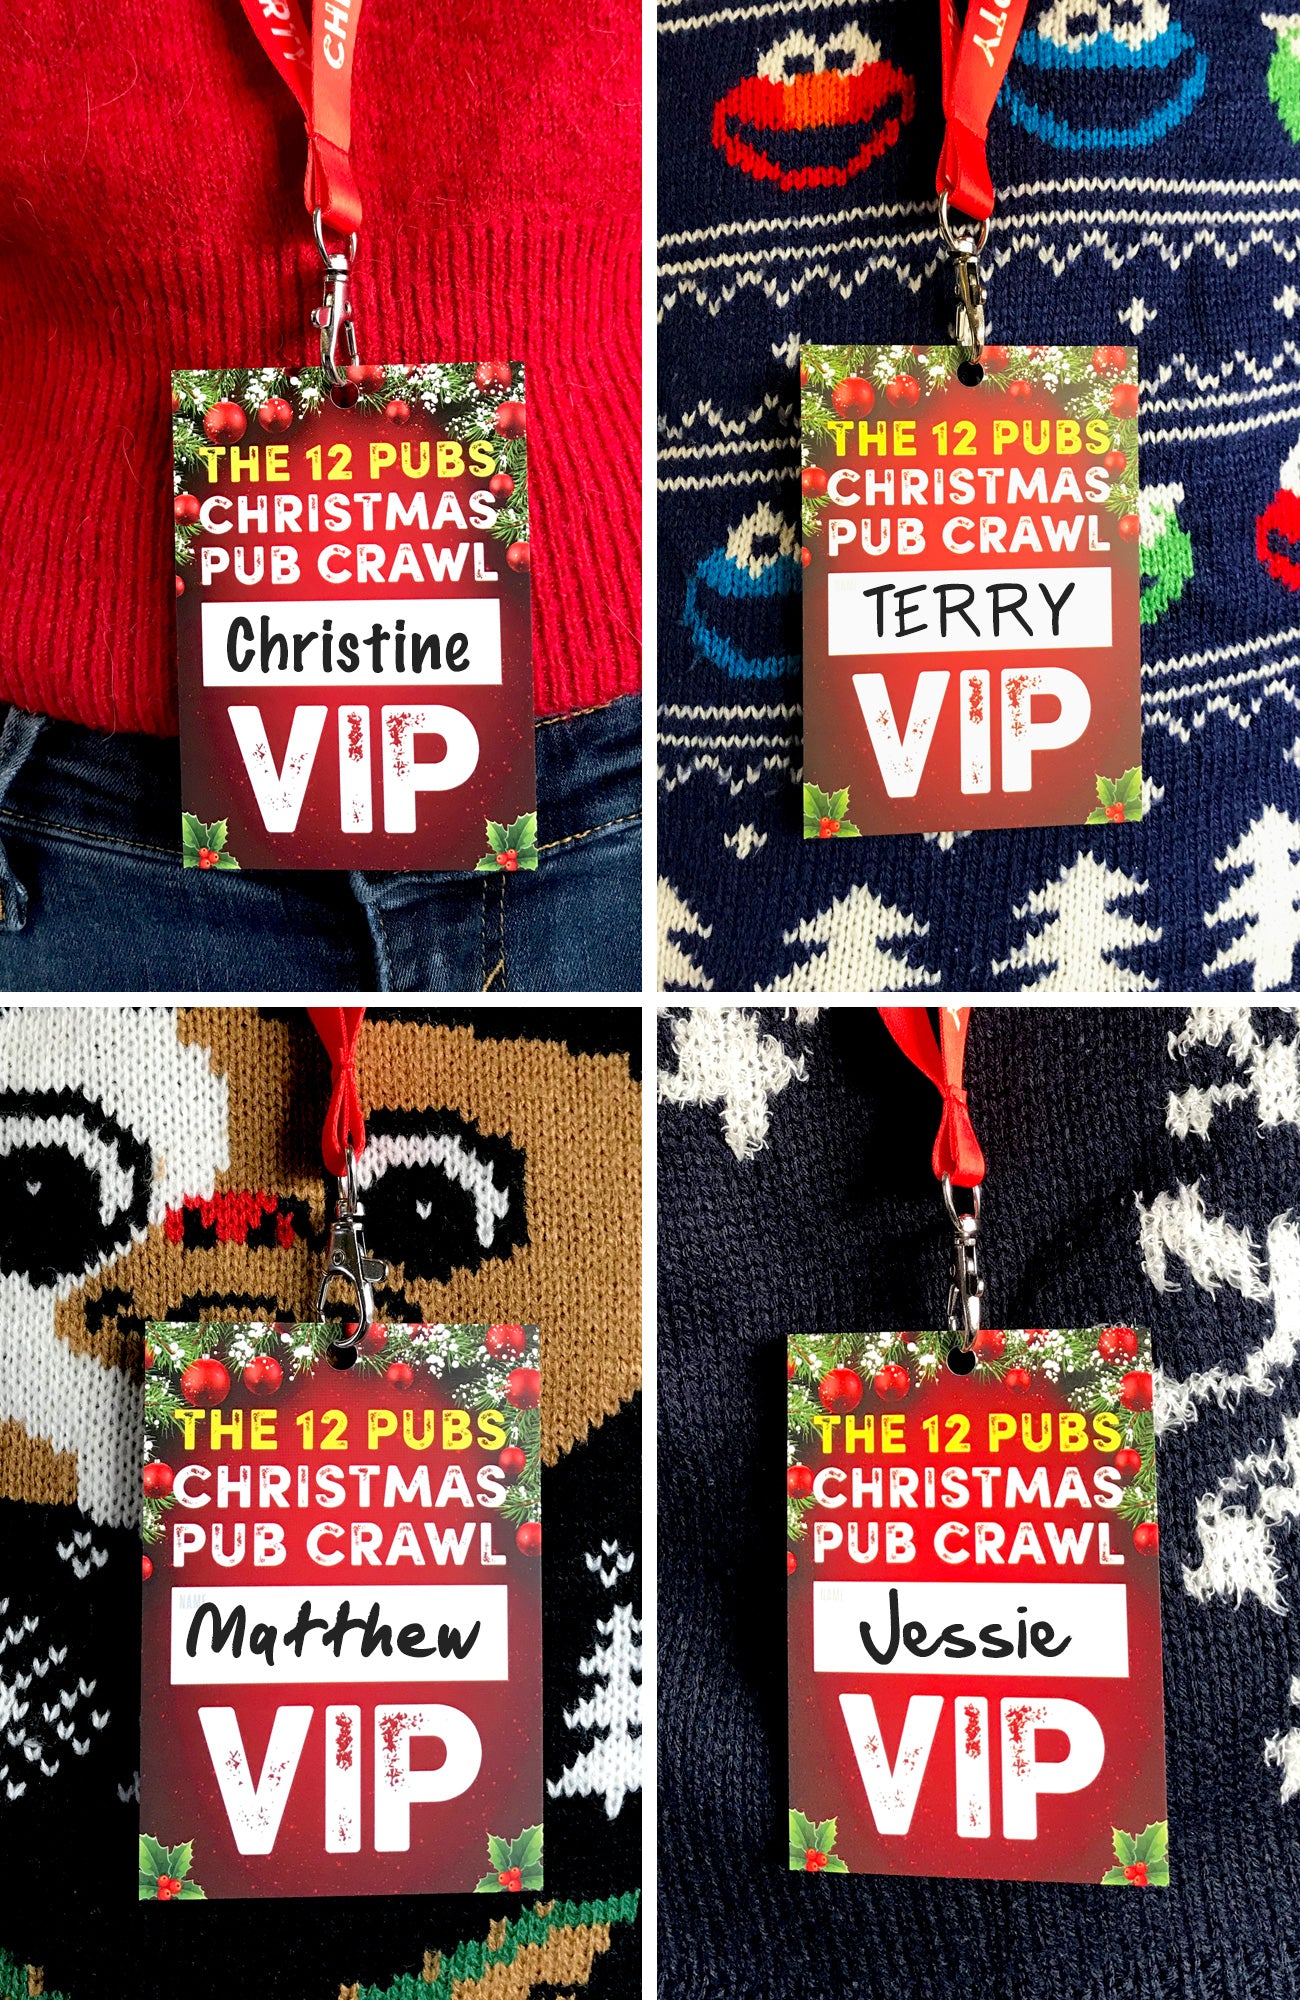 christmas office work party lanyards vip pass